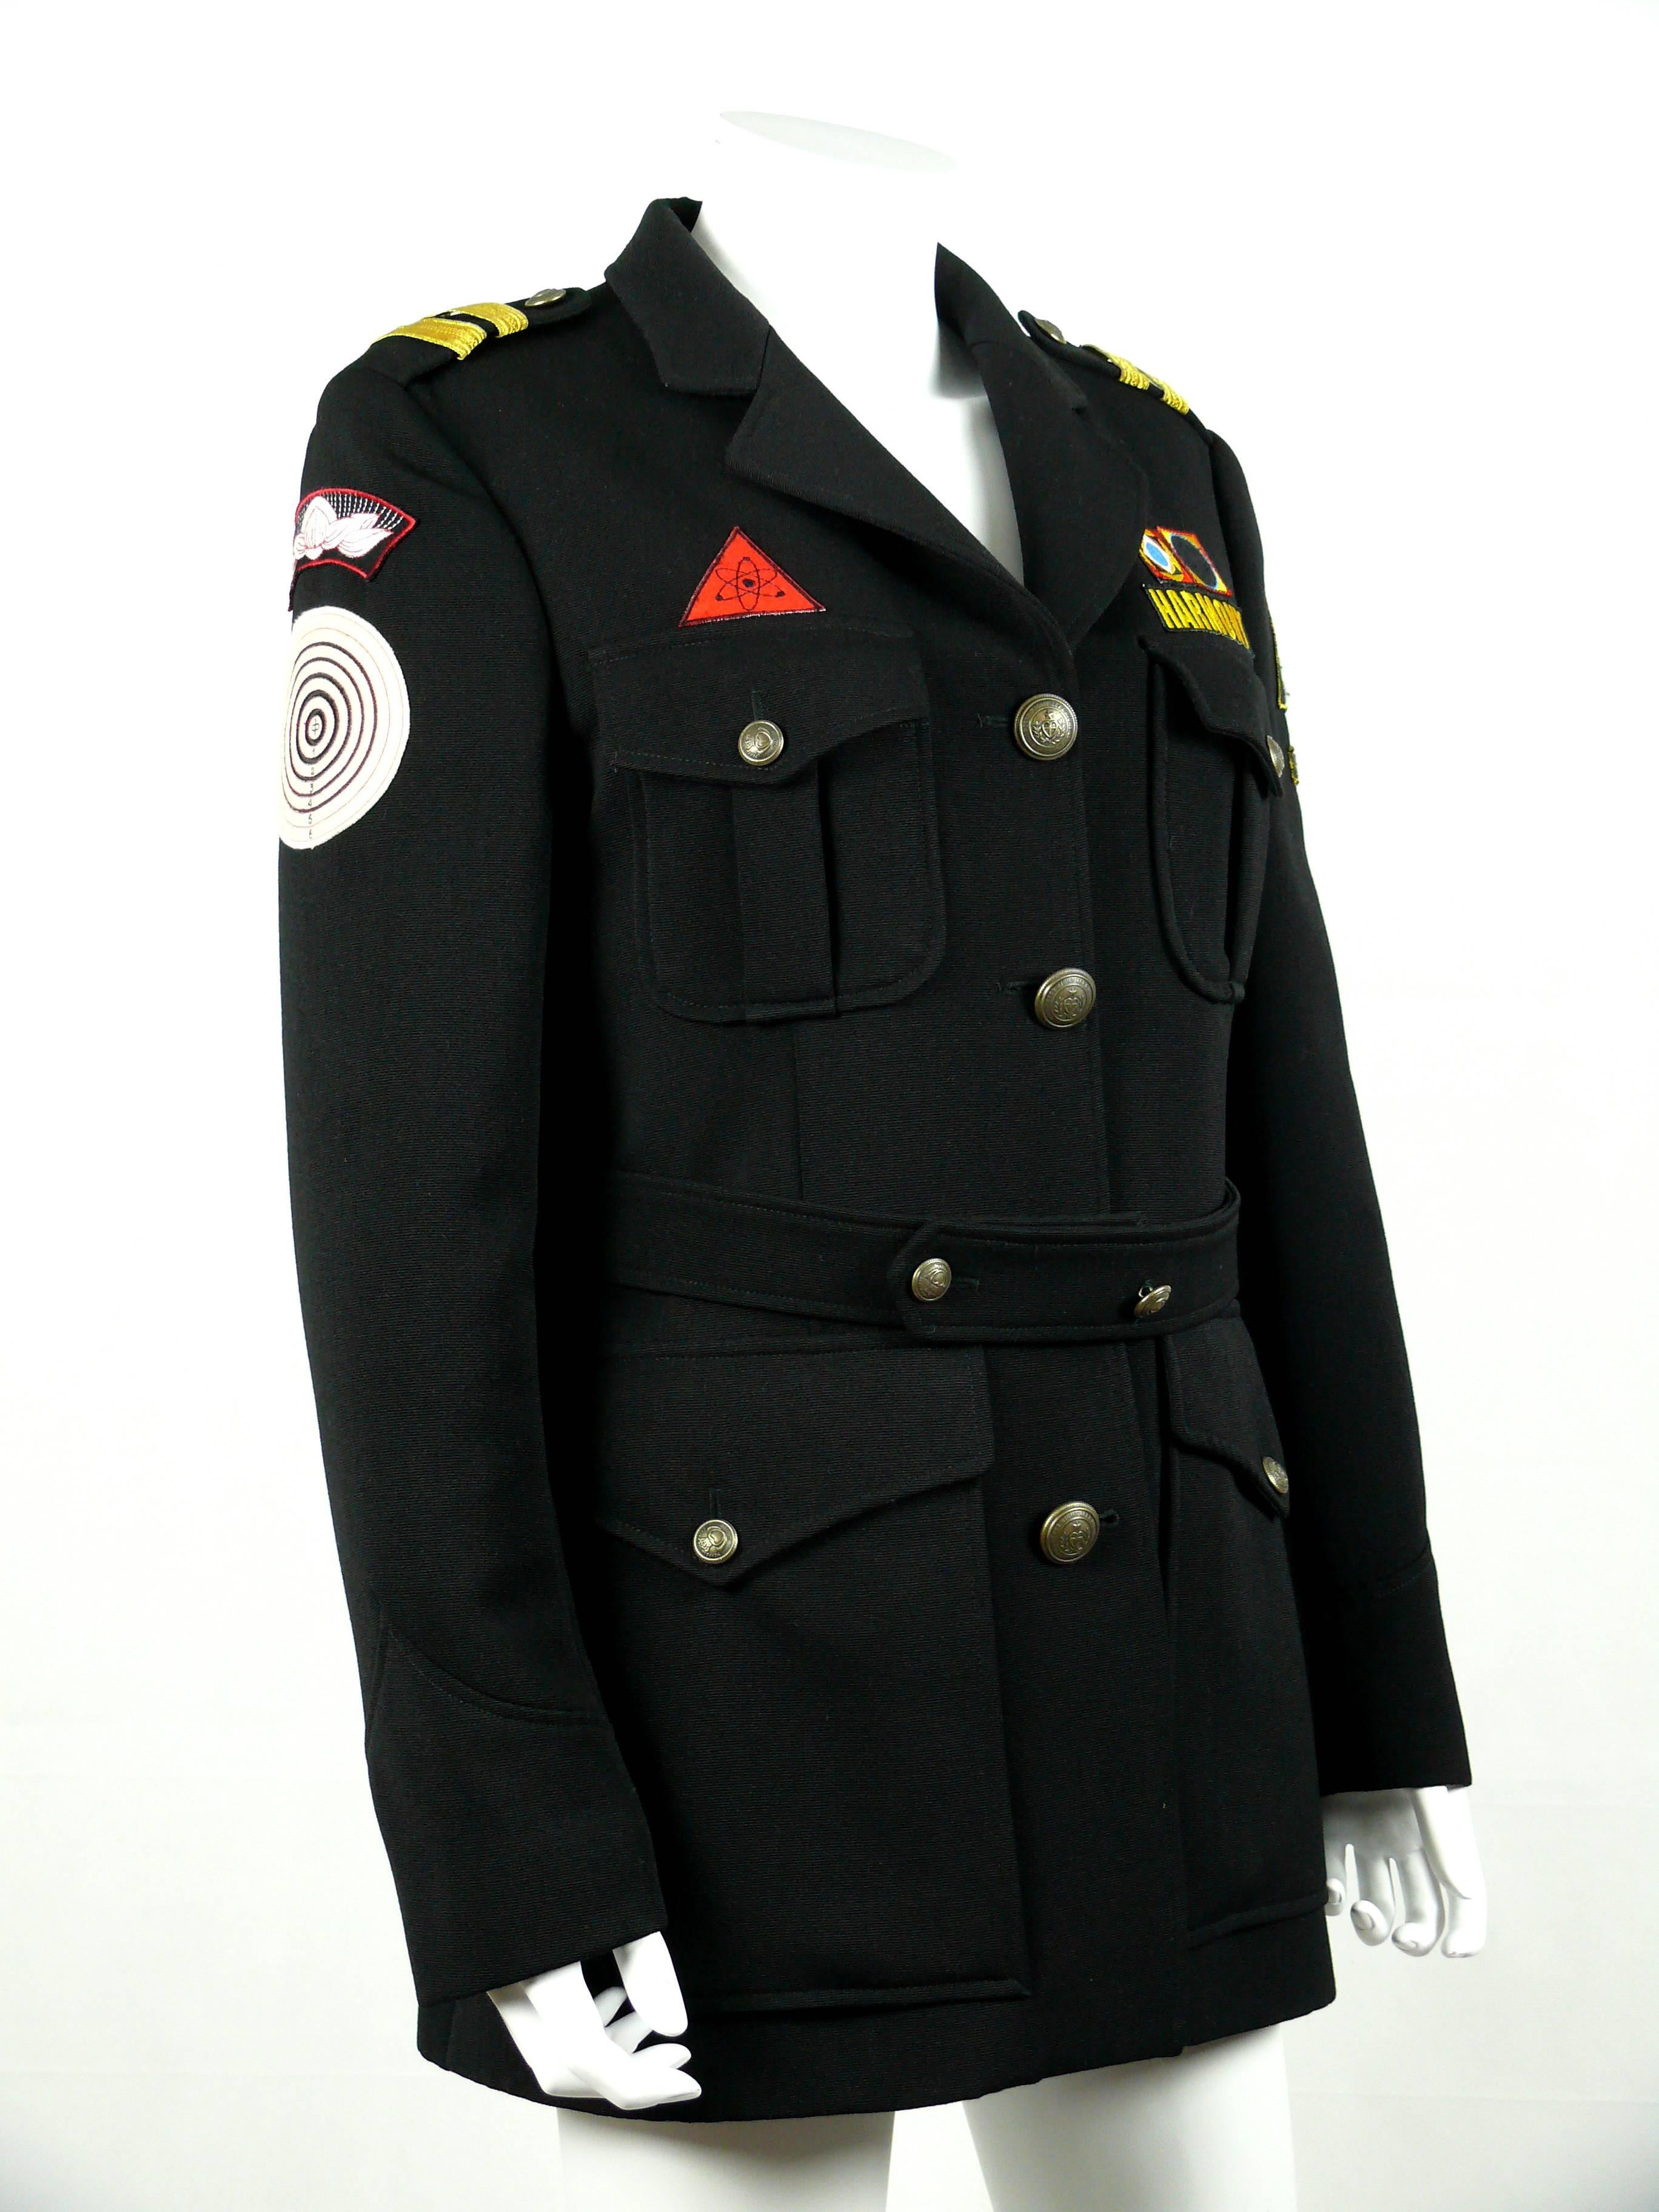 MOSCHINO vintage stunning black military style wool jacket wishing Harmony and Meditation.

Ironic sewn appliques featuring military badges : Yin Yang, No Nukes, No Targets, Chakra...

Front buttoning saying 